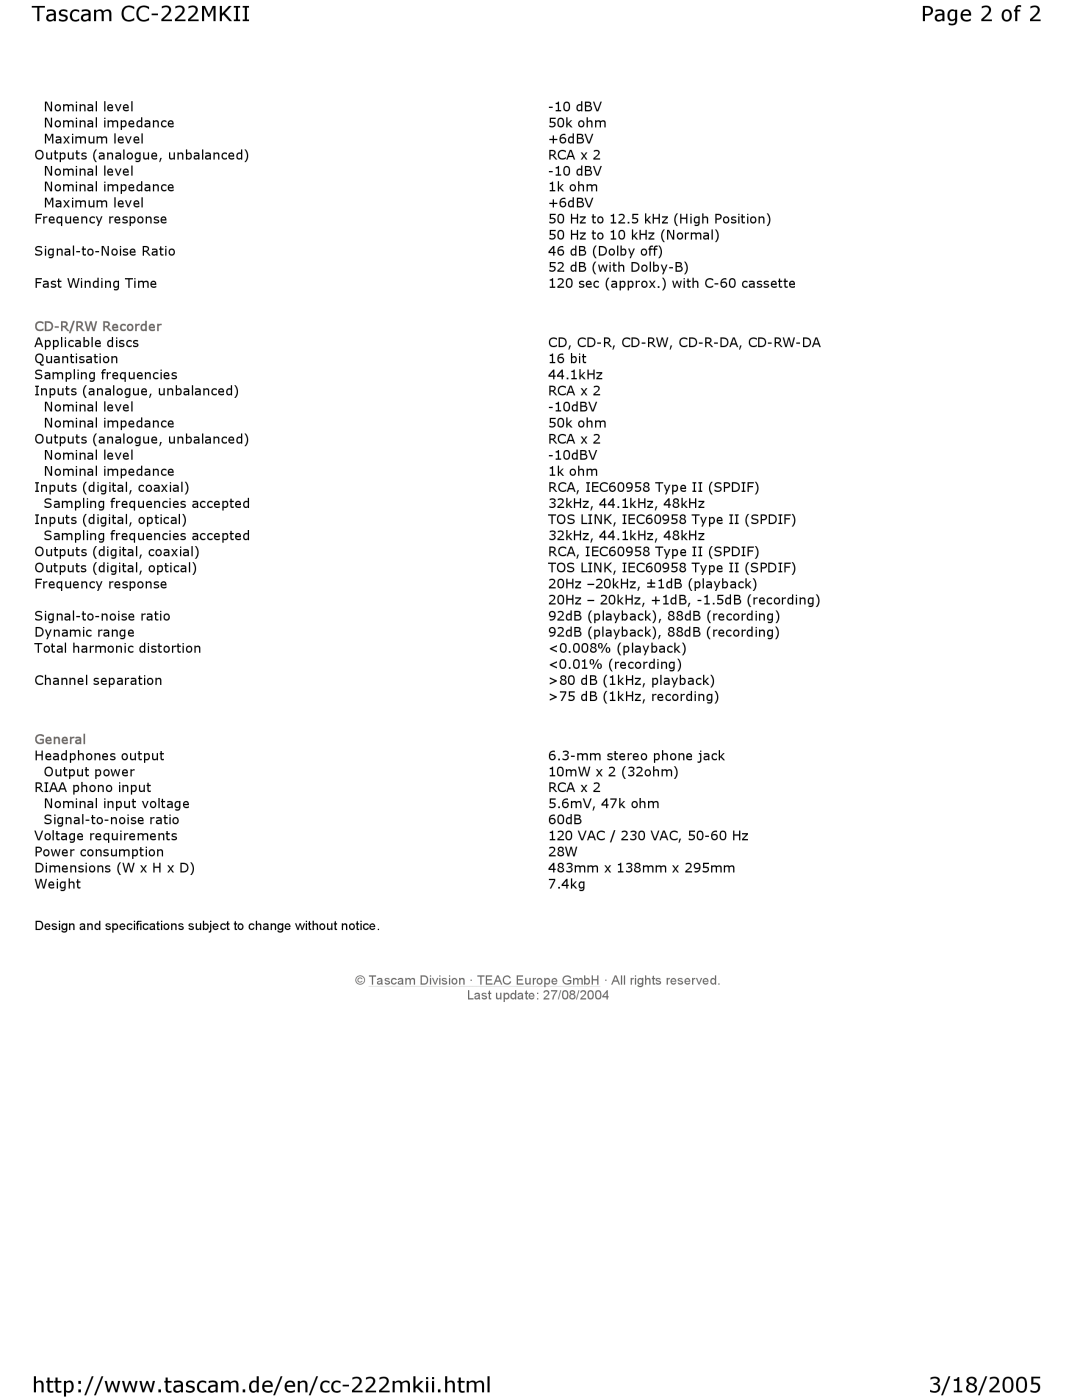 Tascam specifications Page 2 of, Tascam CC-222MKII, 3/18/2005, CD-R/RWRecorder, General, Last update 27/08/2004 